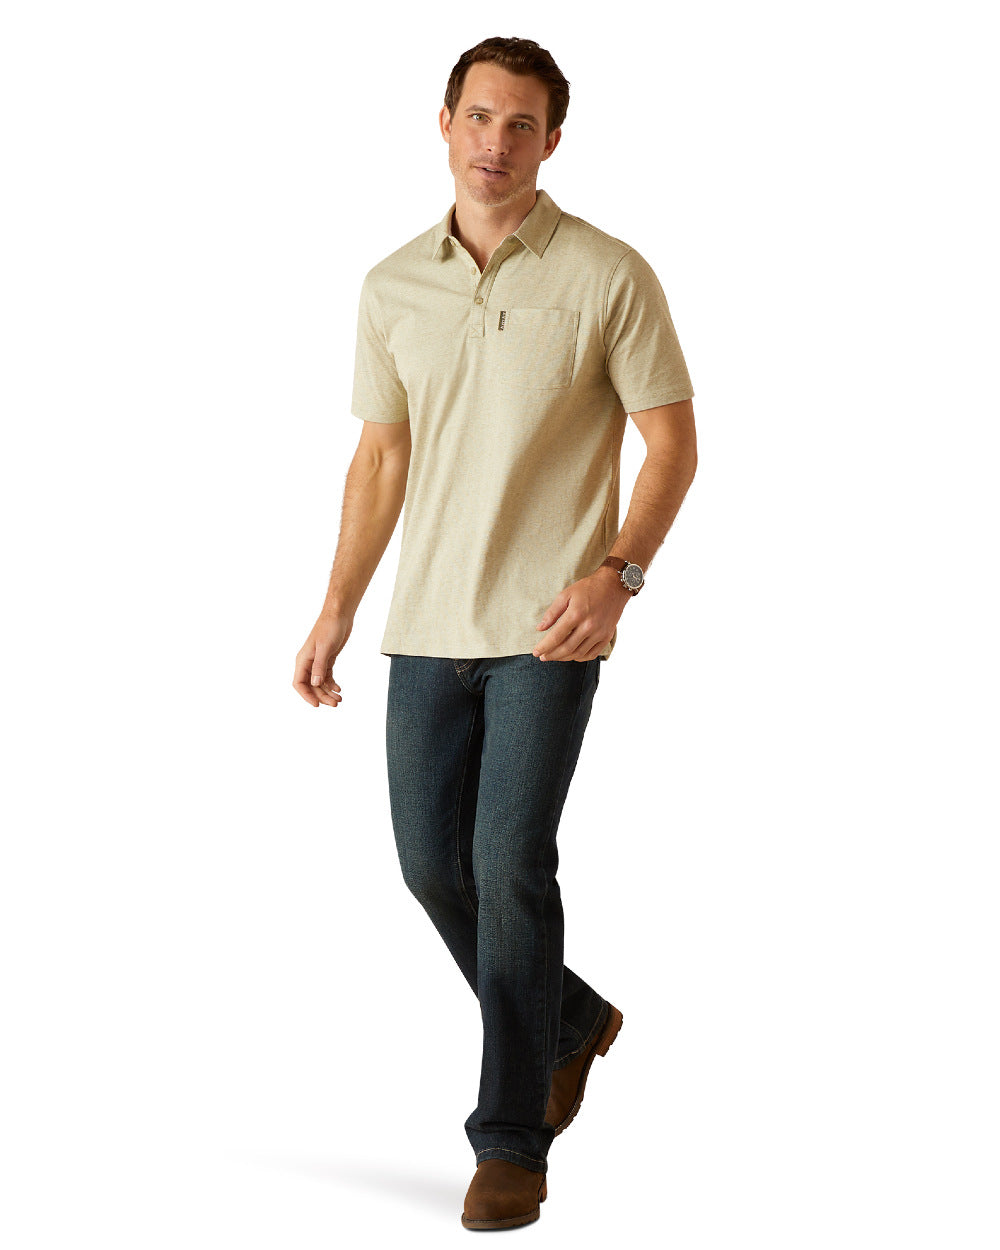 Sage Heather Coloured Ariat Mens Chorley Polo Shirt On A White Background 